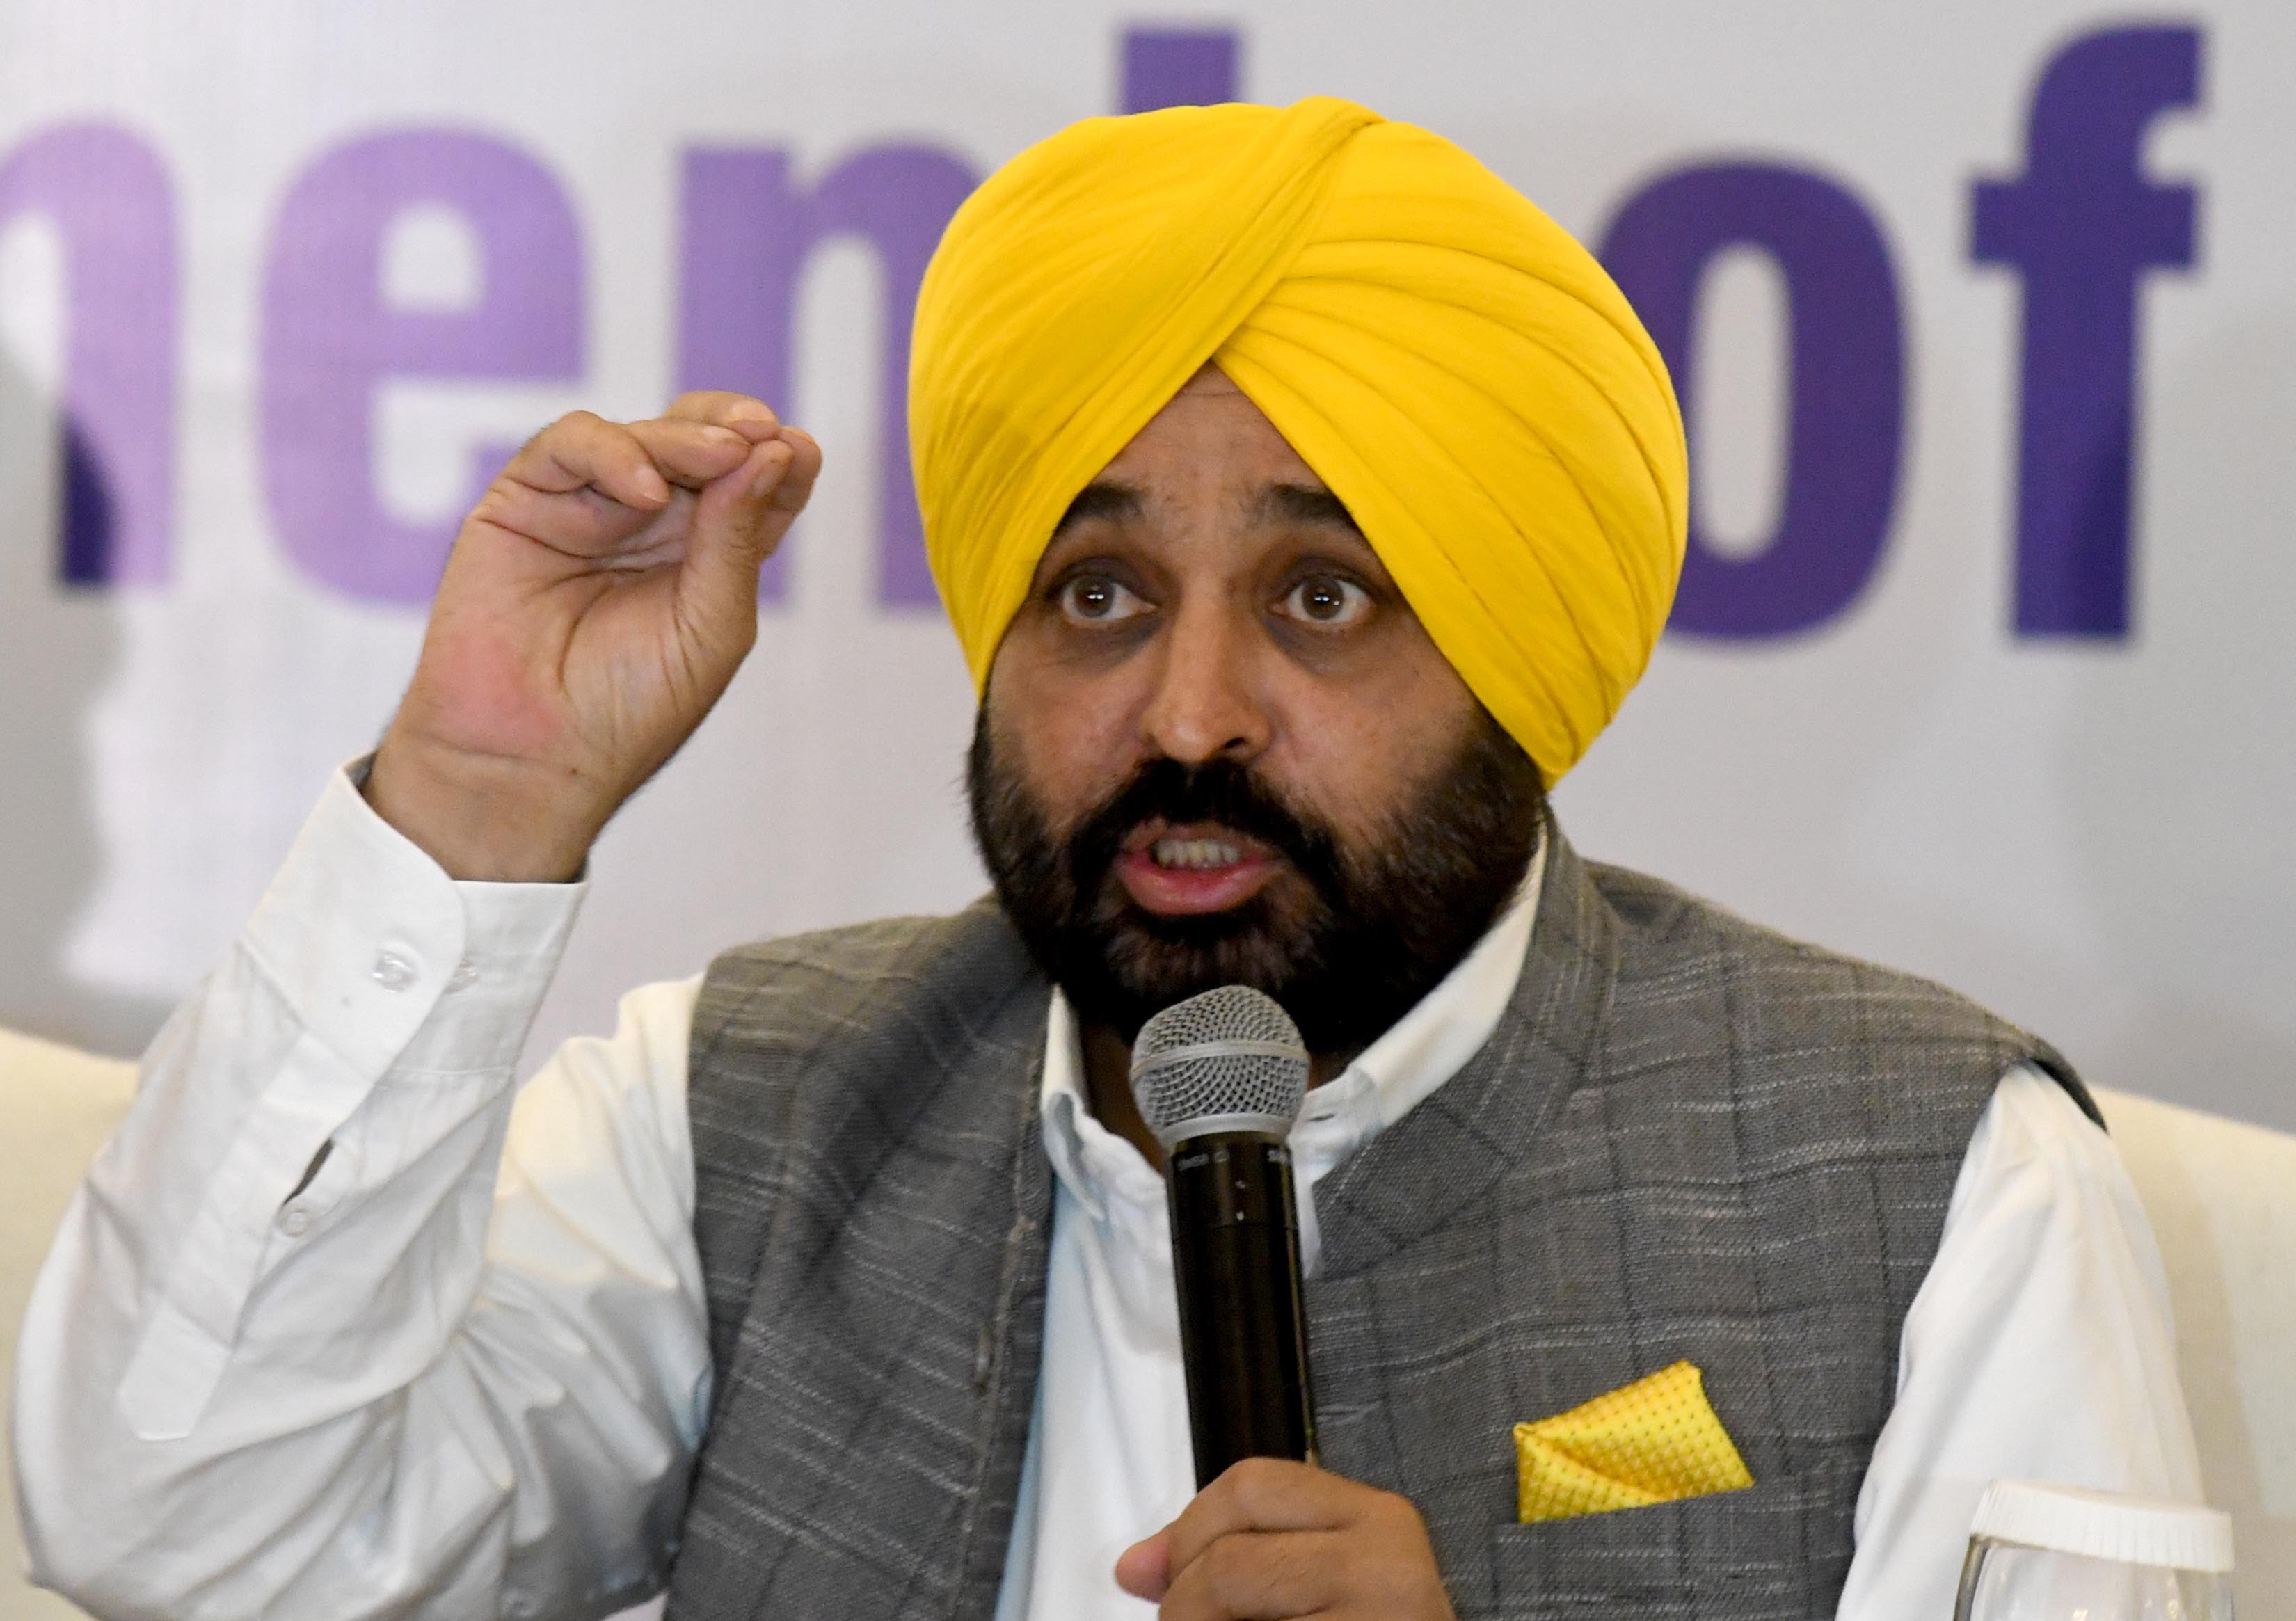 Punjab CM to take action against ex-Punjab DGP, others over PM’s security breach